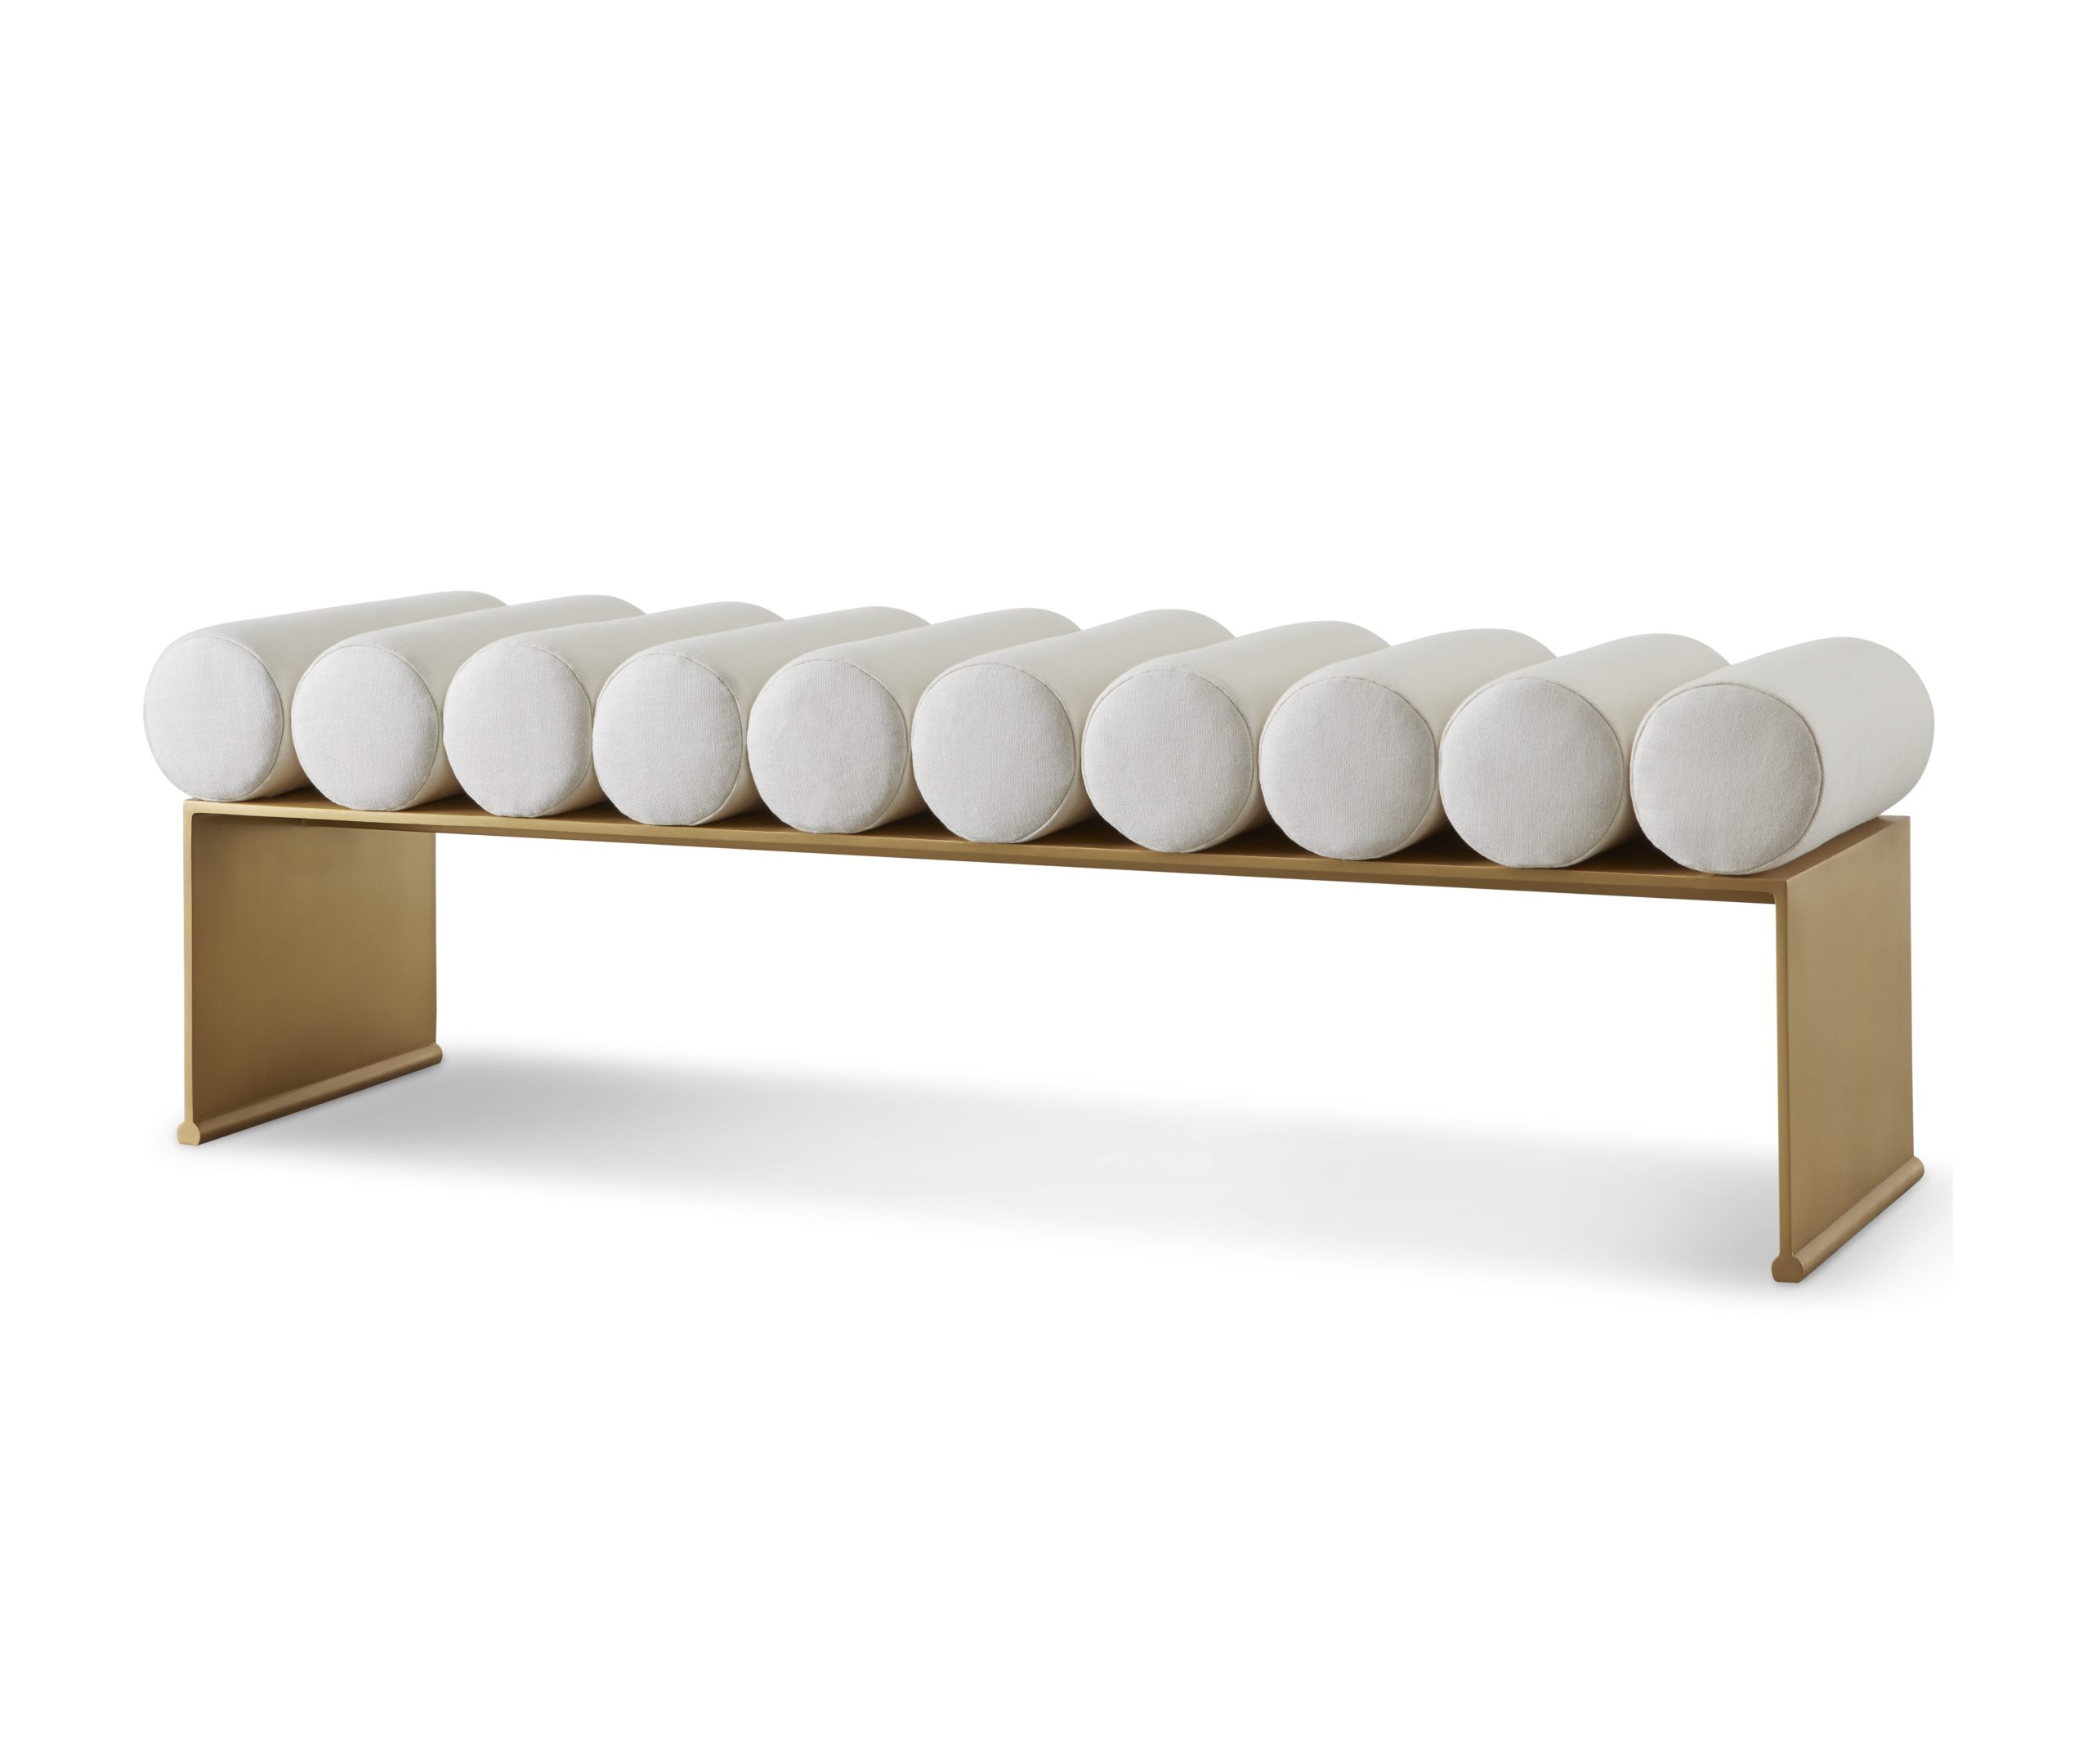 Baker_products_WNWN_runway_bench_BAA3216_FRONT_3QRT-scaled-1